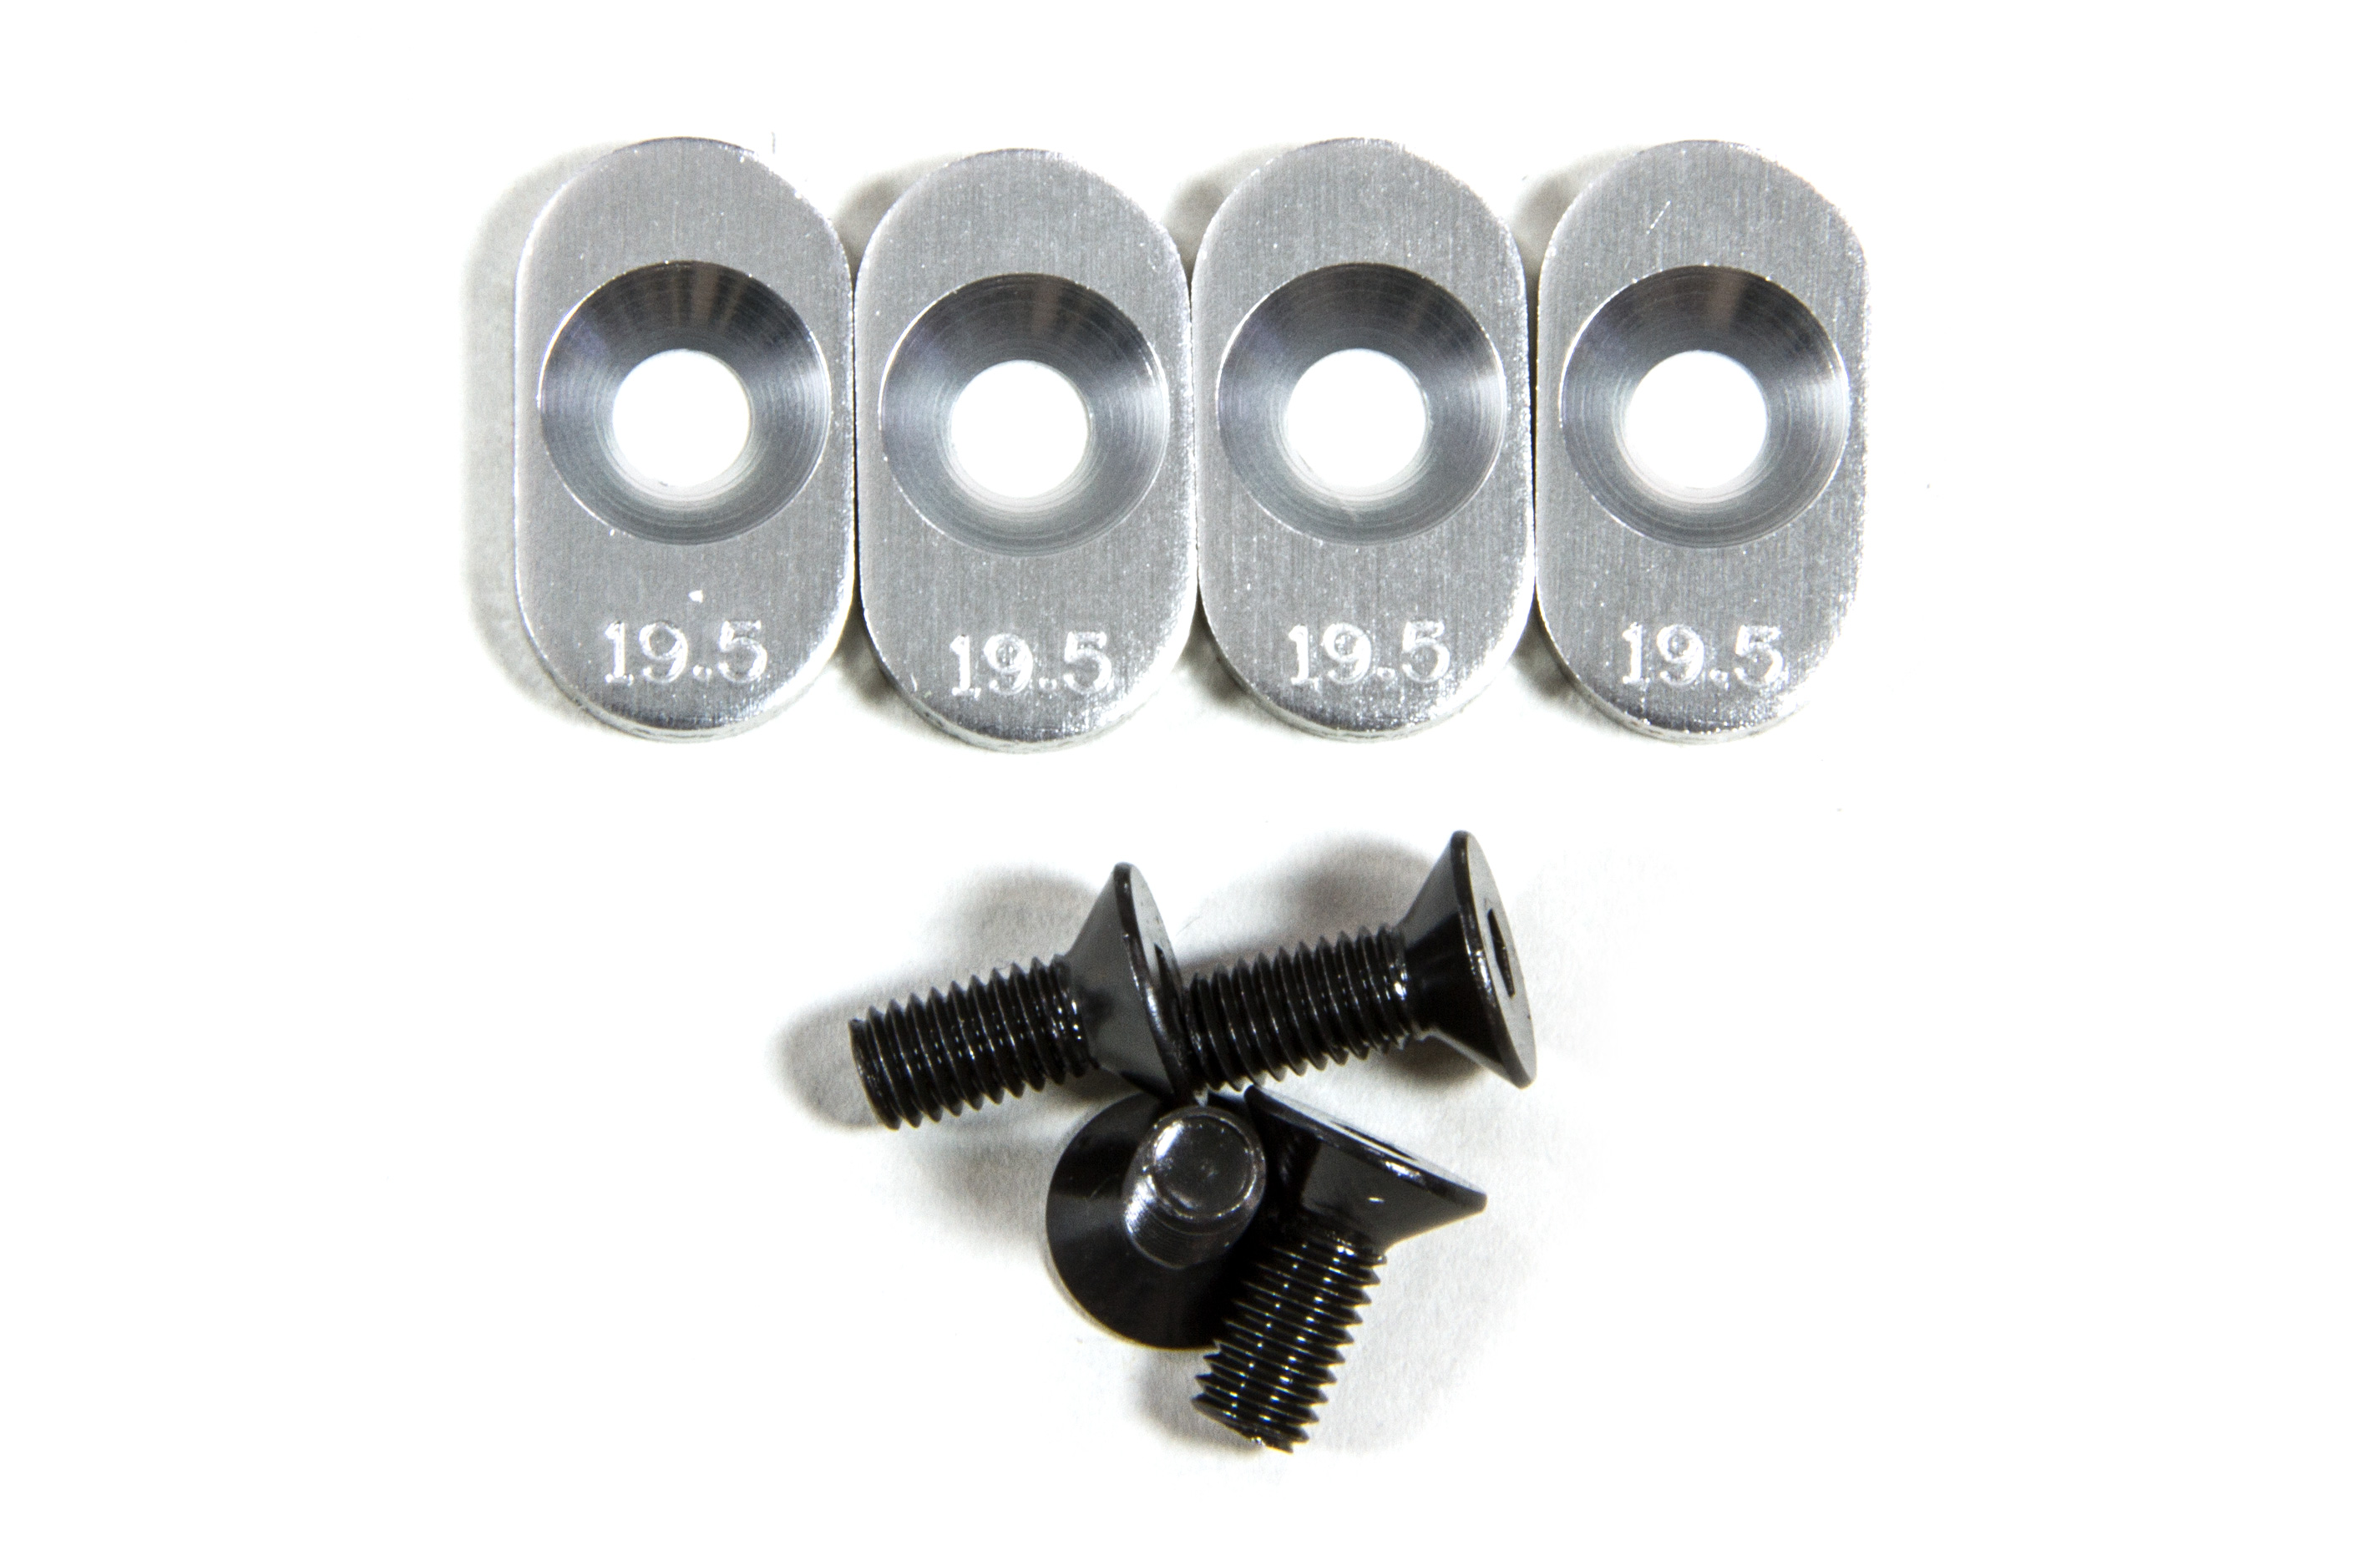 LOSB5804 Losi Engine Mount Inserts & Screws, 19.5/58, 5T, TLR 5ive-B and Mini WRC